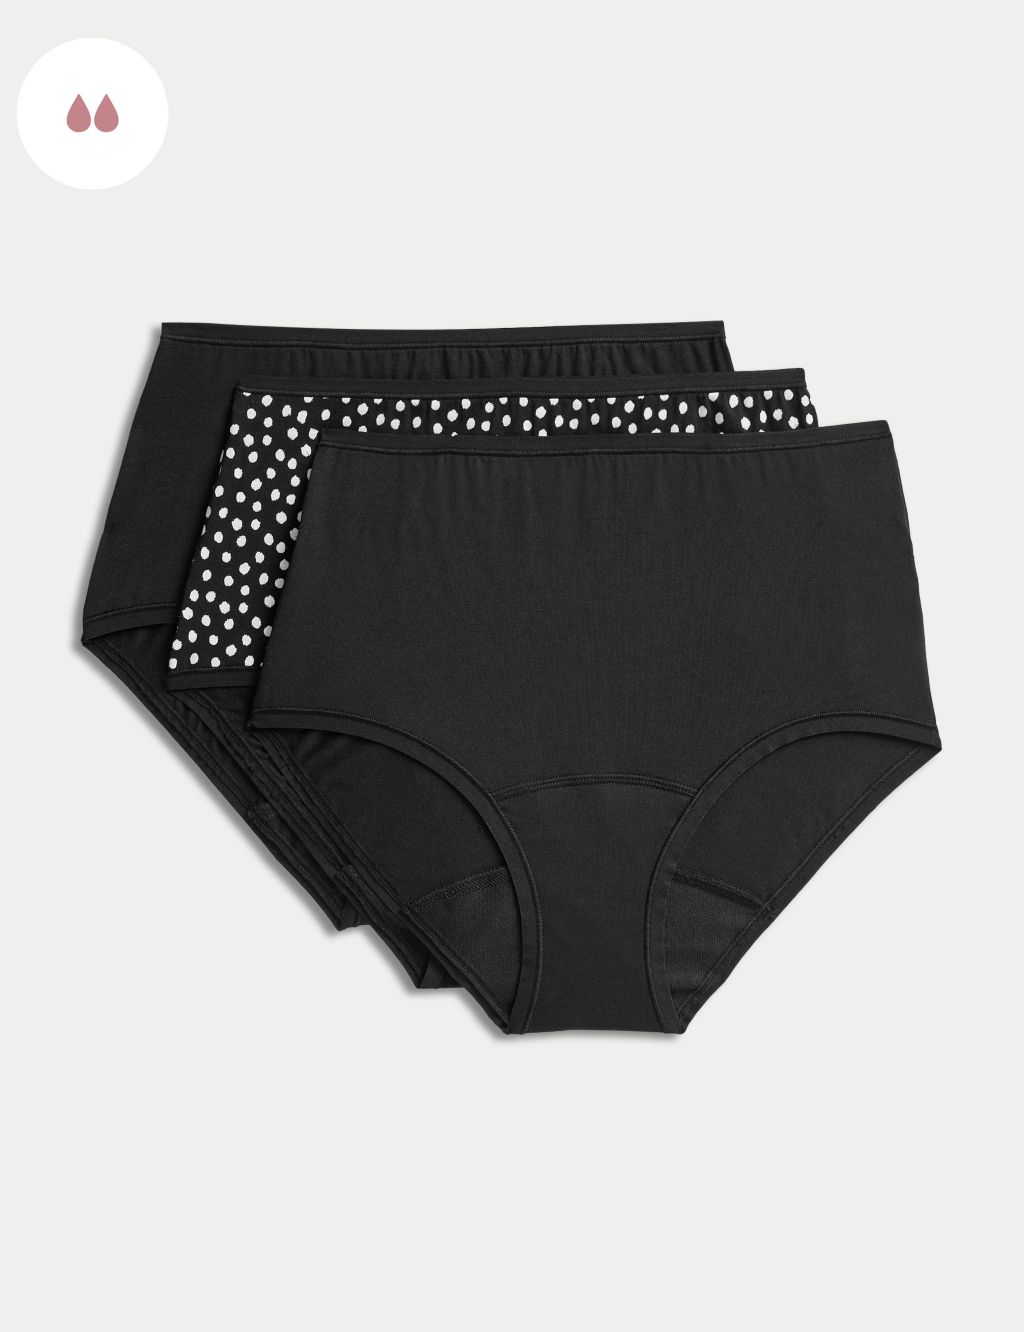 Shop Marks & Spencer Women's Seamless Knickers up to 70% Off